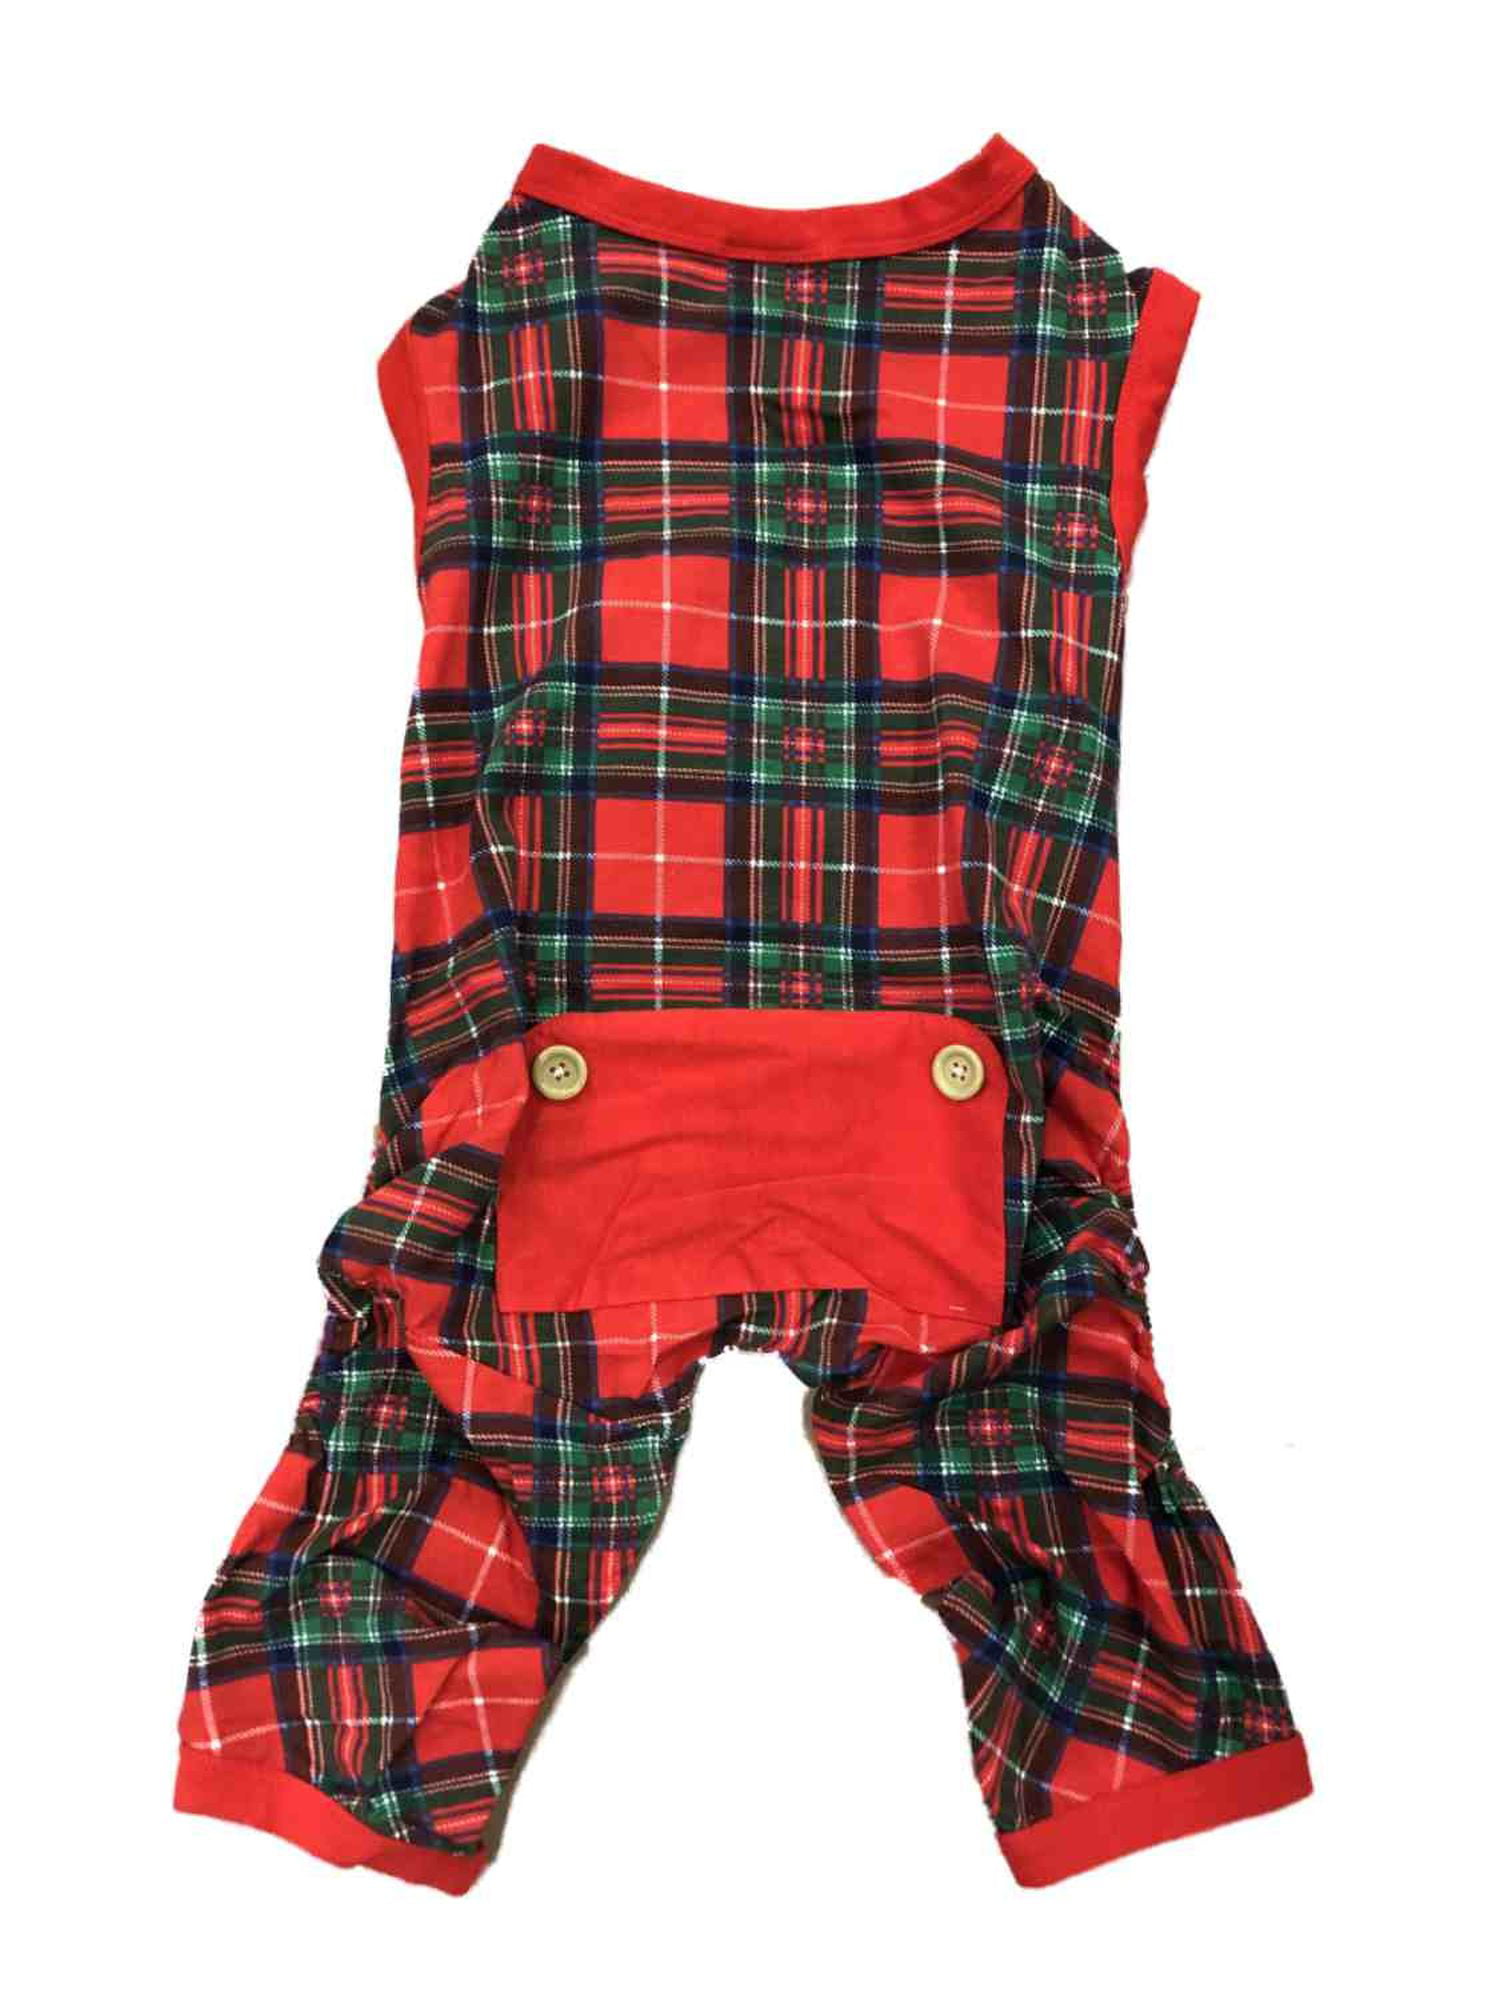 Red Plaid Buttons Christmas Holiday Dog Pajamas Pet Costume Outfit Medium - www.waterandnature.org ...